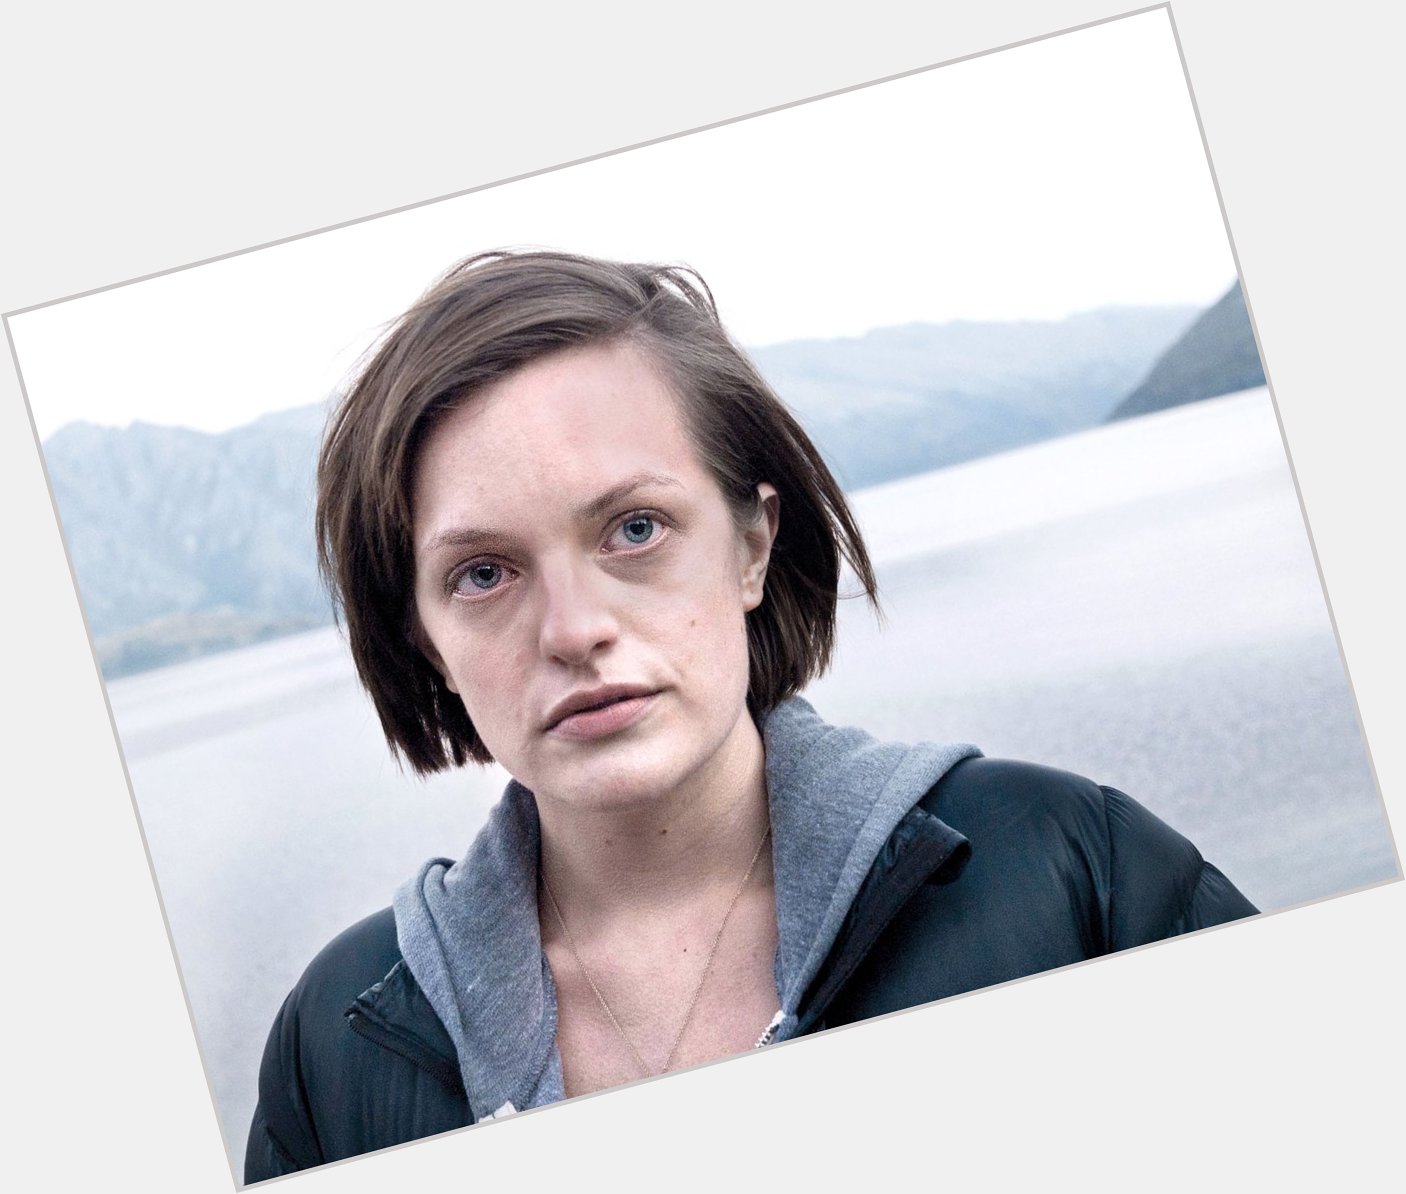 Happy birthday to one of the most talented and underrated actresses out there, Elisabeth Moss. 